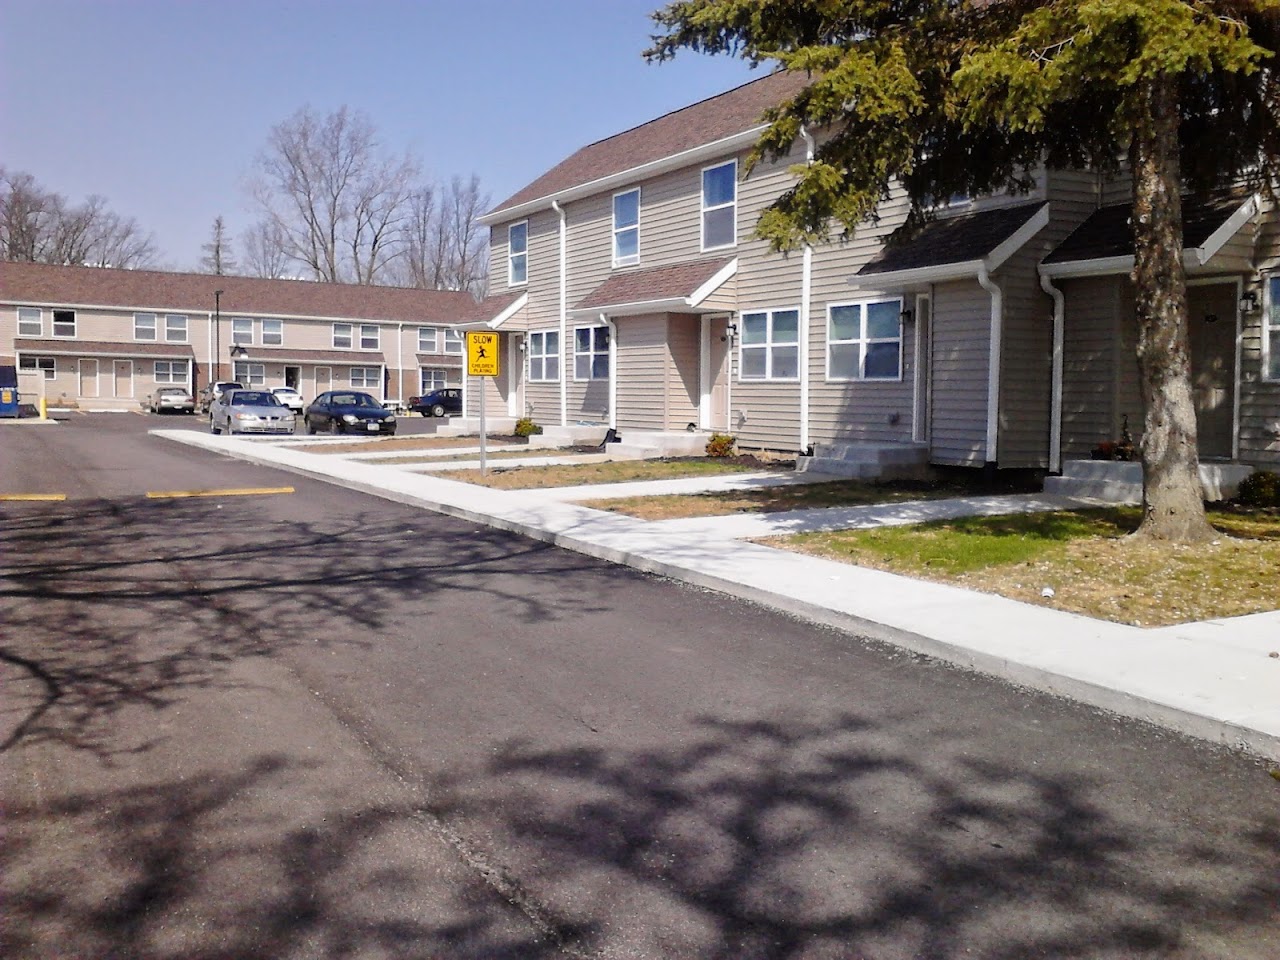 Photo of POINT VILLAGE APTS. Affordable housing located at 400 LINCOLN BLVD RUSSELLS POINT, OH 43348